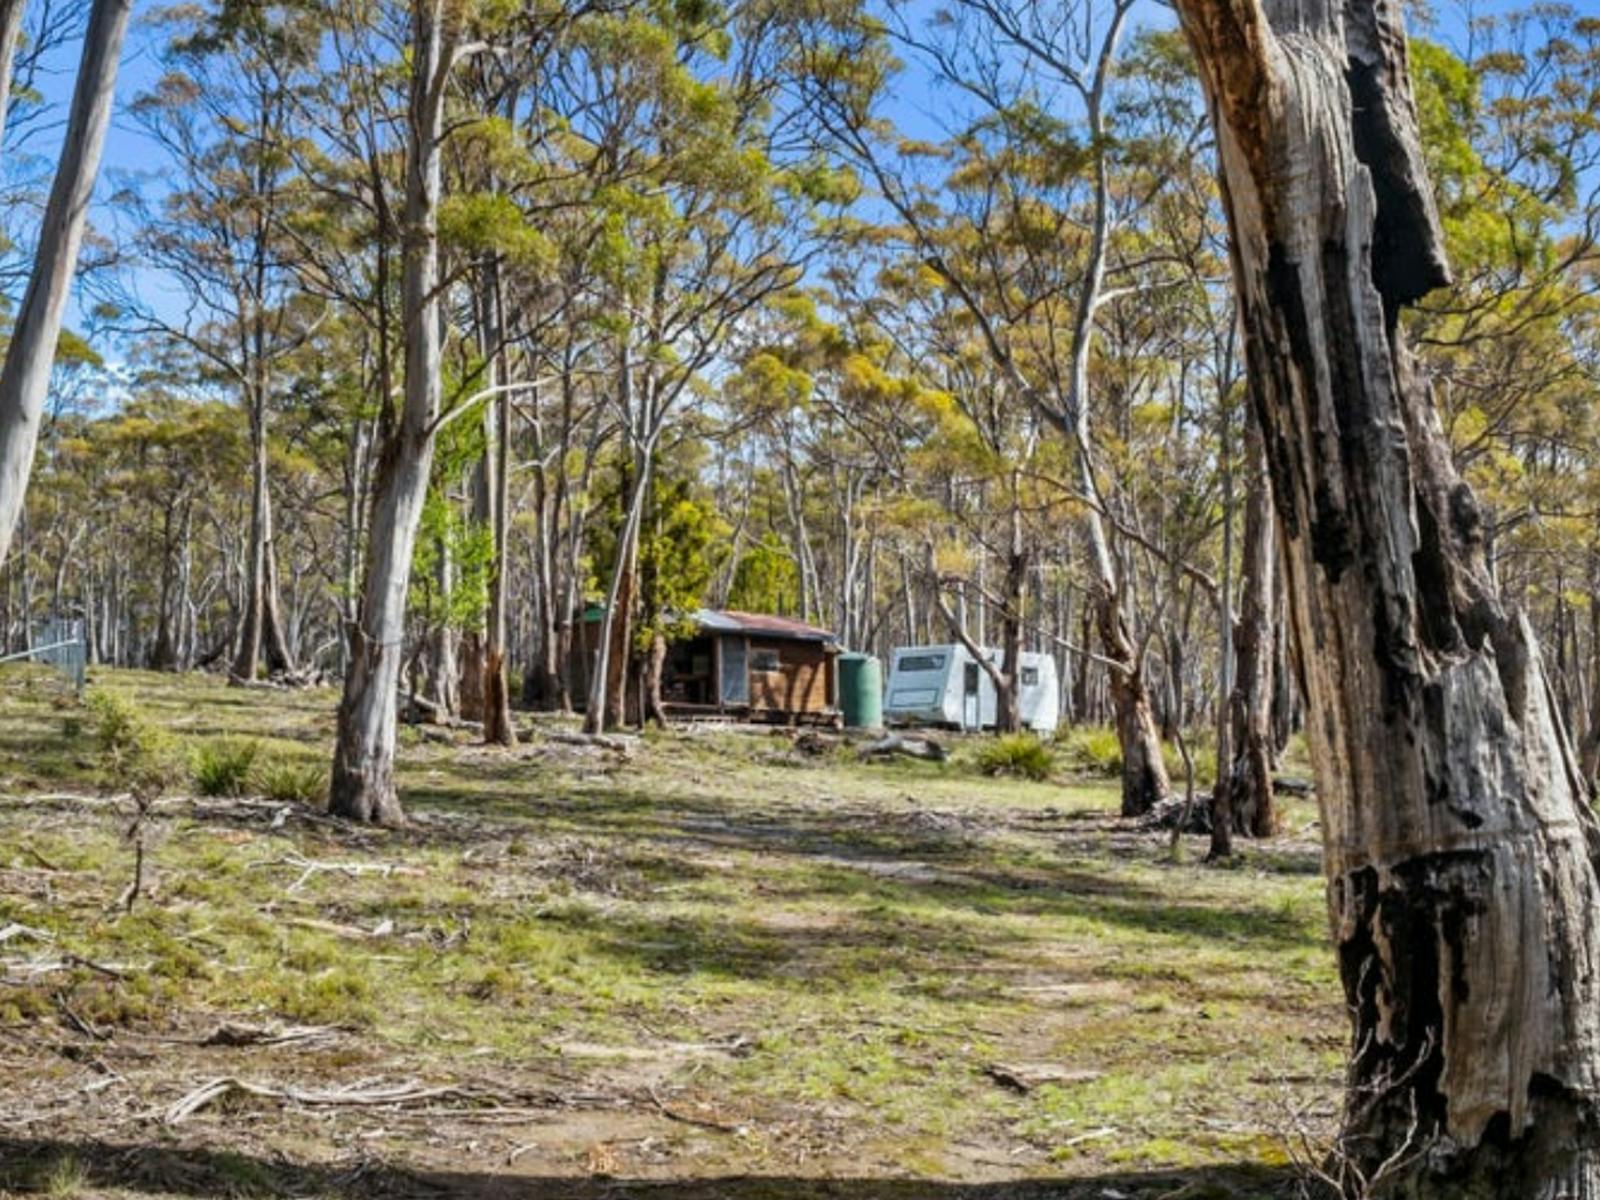 Quoll Hideaway - Bush & Beach camping is an excellent escape on Bruny Island